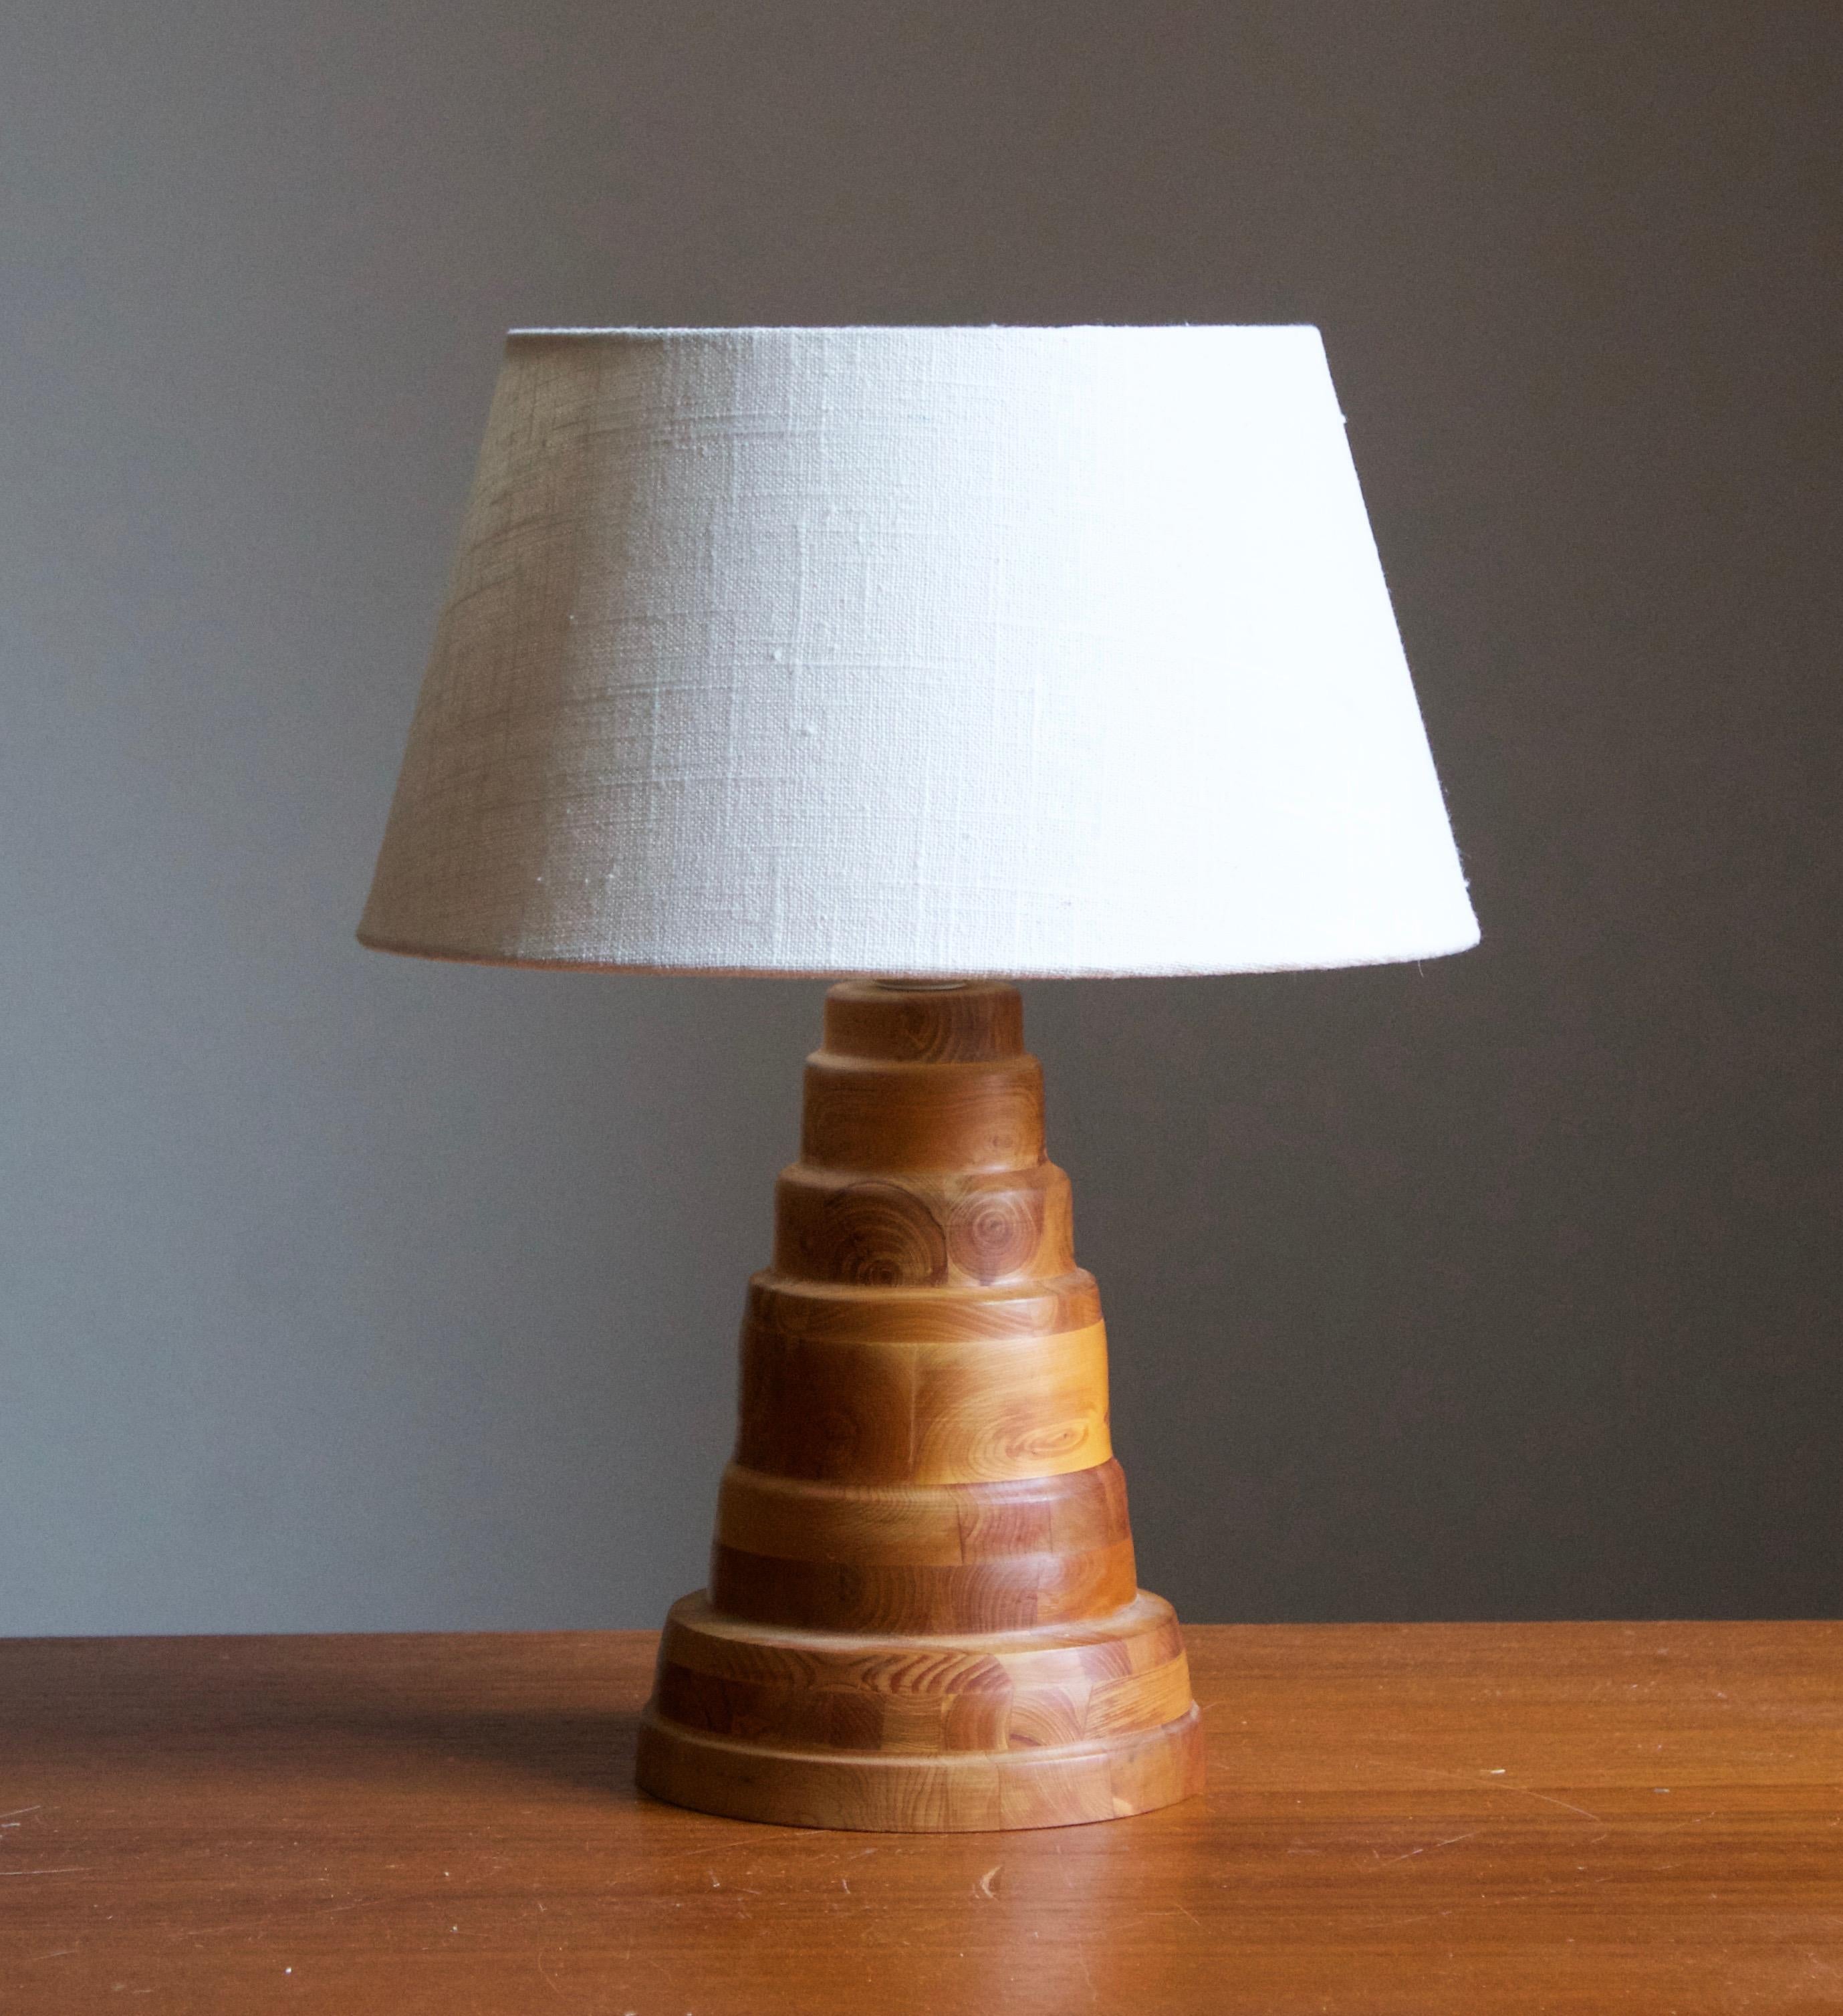 A pine table lamp, designed and produced in Sweden, Initialed and dated 1985.

Stated dimensions exclude lampshade. Height includes socket. Sold without lampshades.